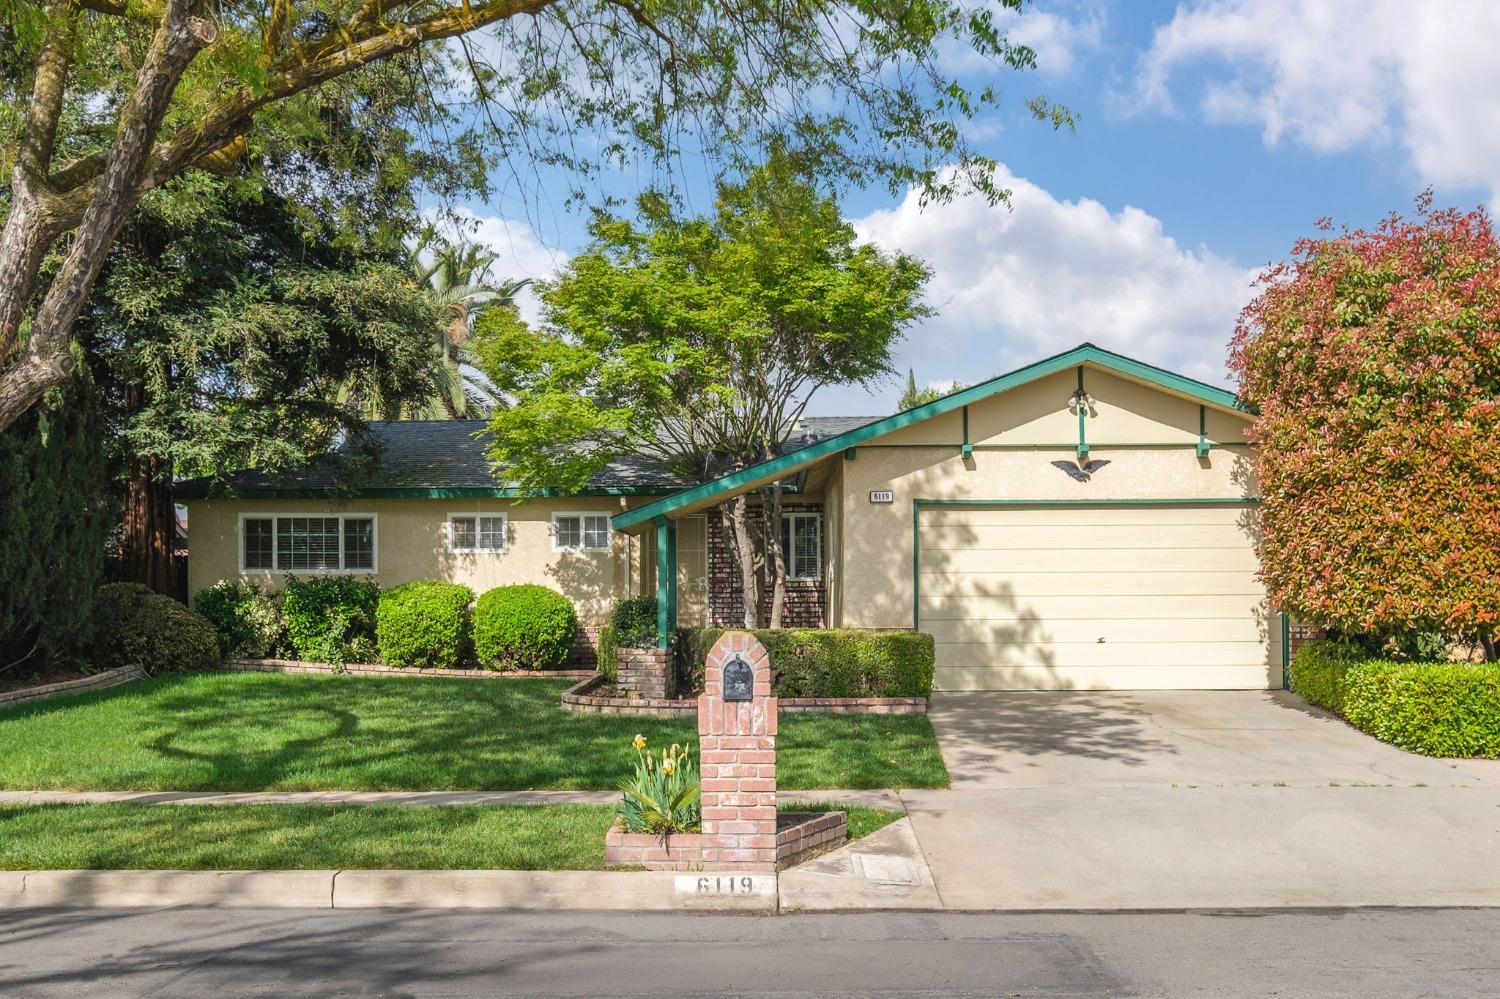 Photo of 6119 N Selland Ave in Fresno, CA